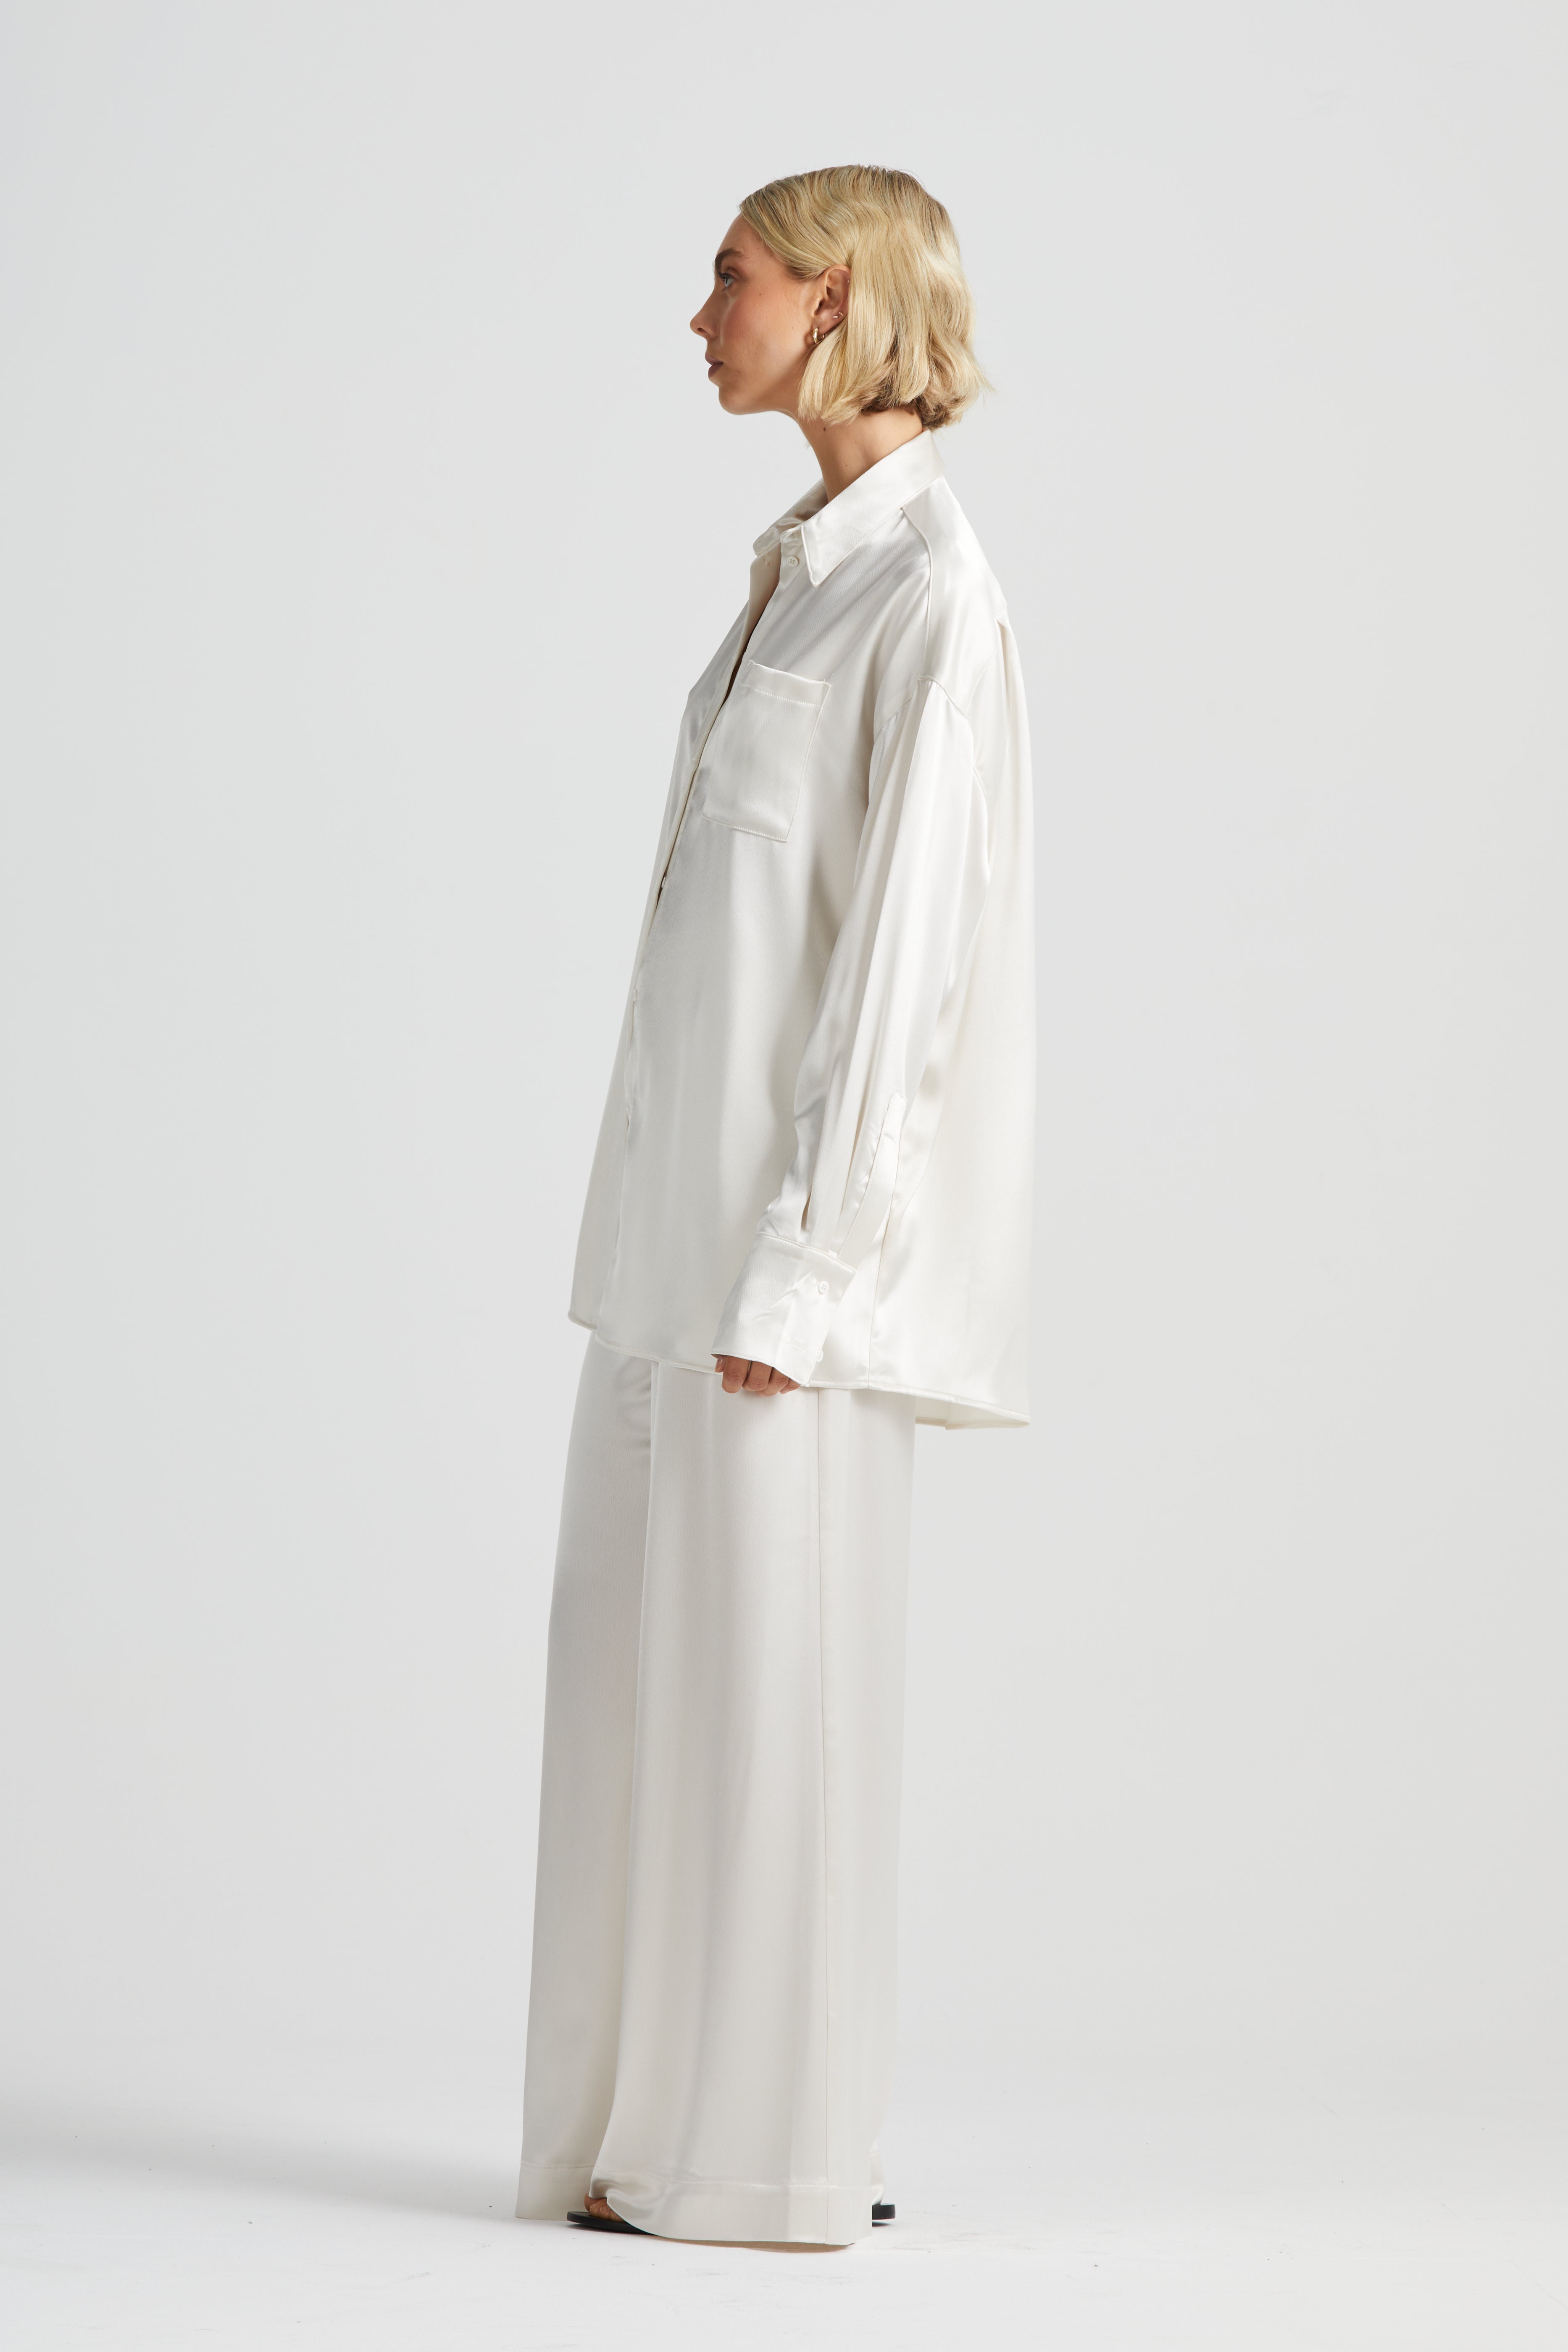 The Luxe Relaxed Monogram Silk Shirt | Ivory Hammered Satin $509